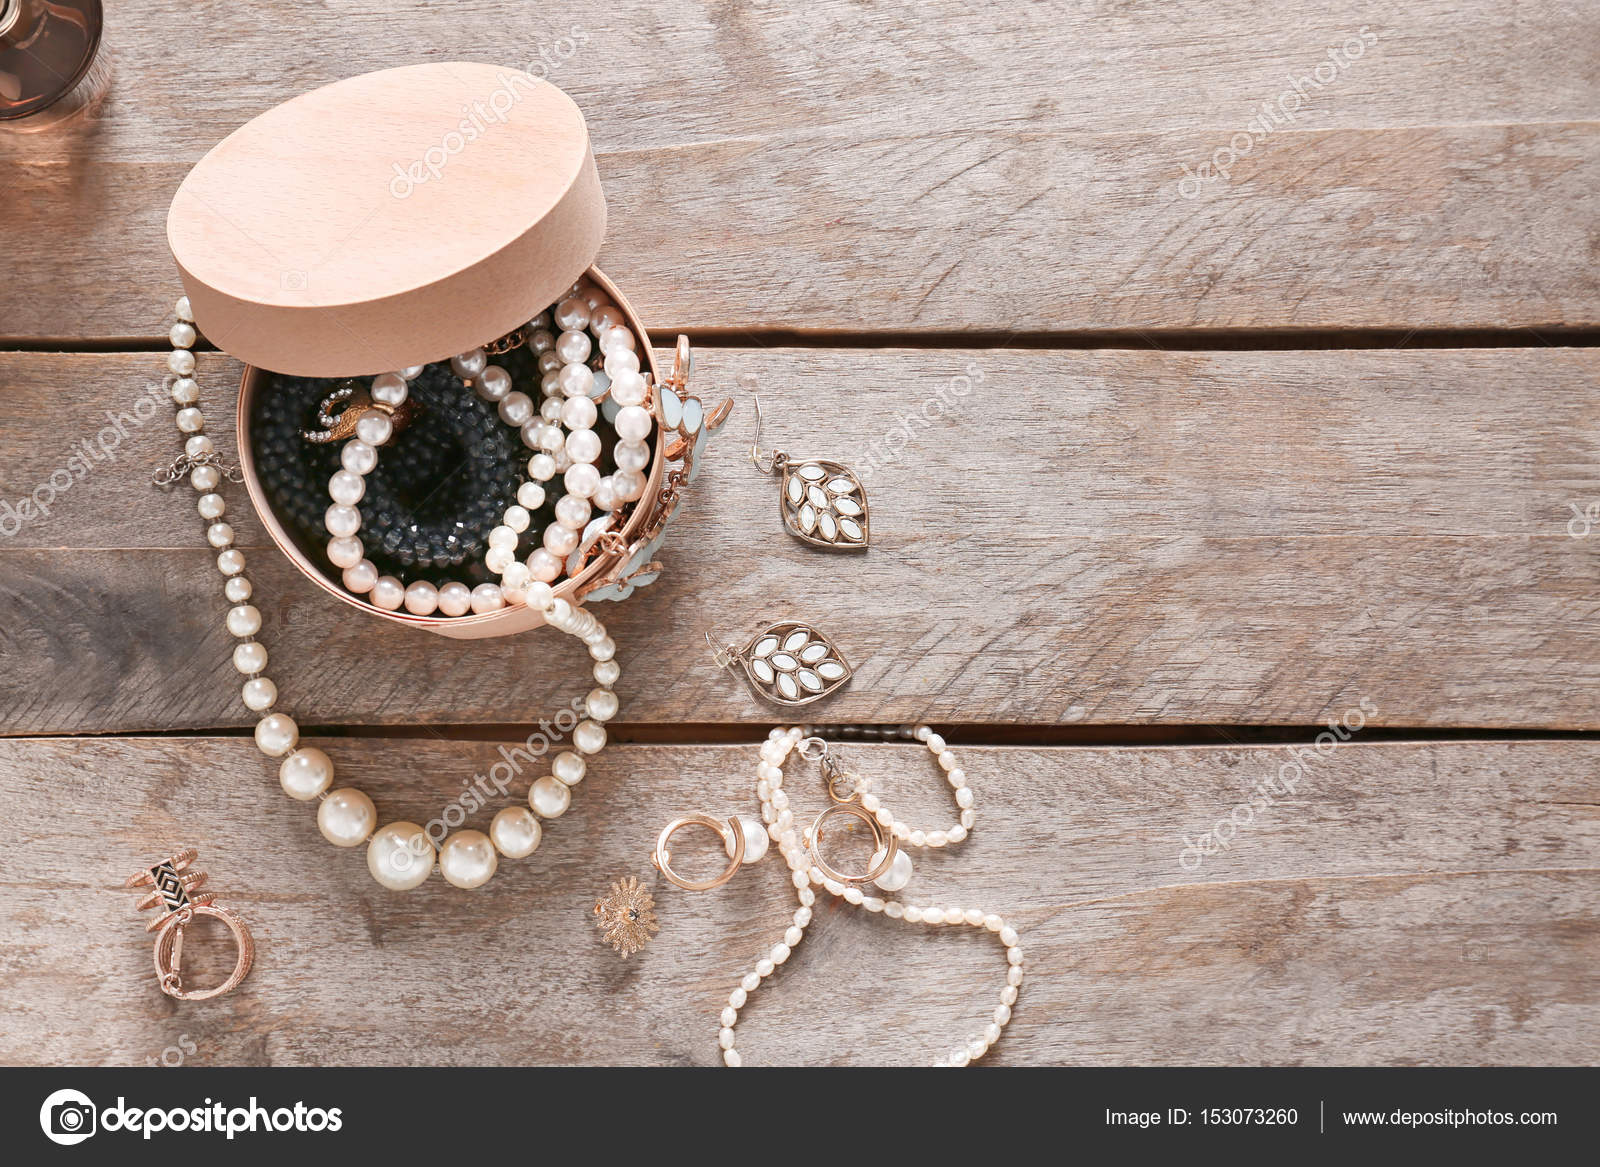 Accessories Photos, Royalty Free Accessories Images Depositphotos